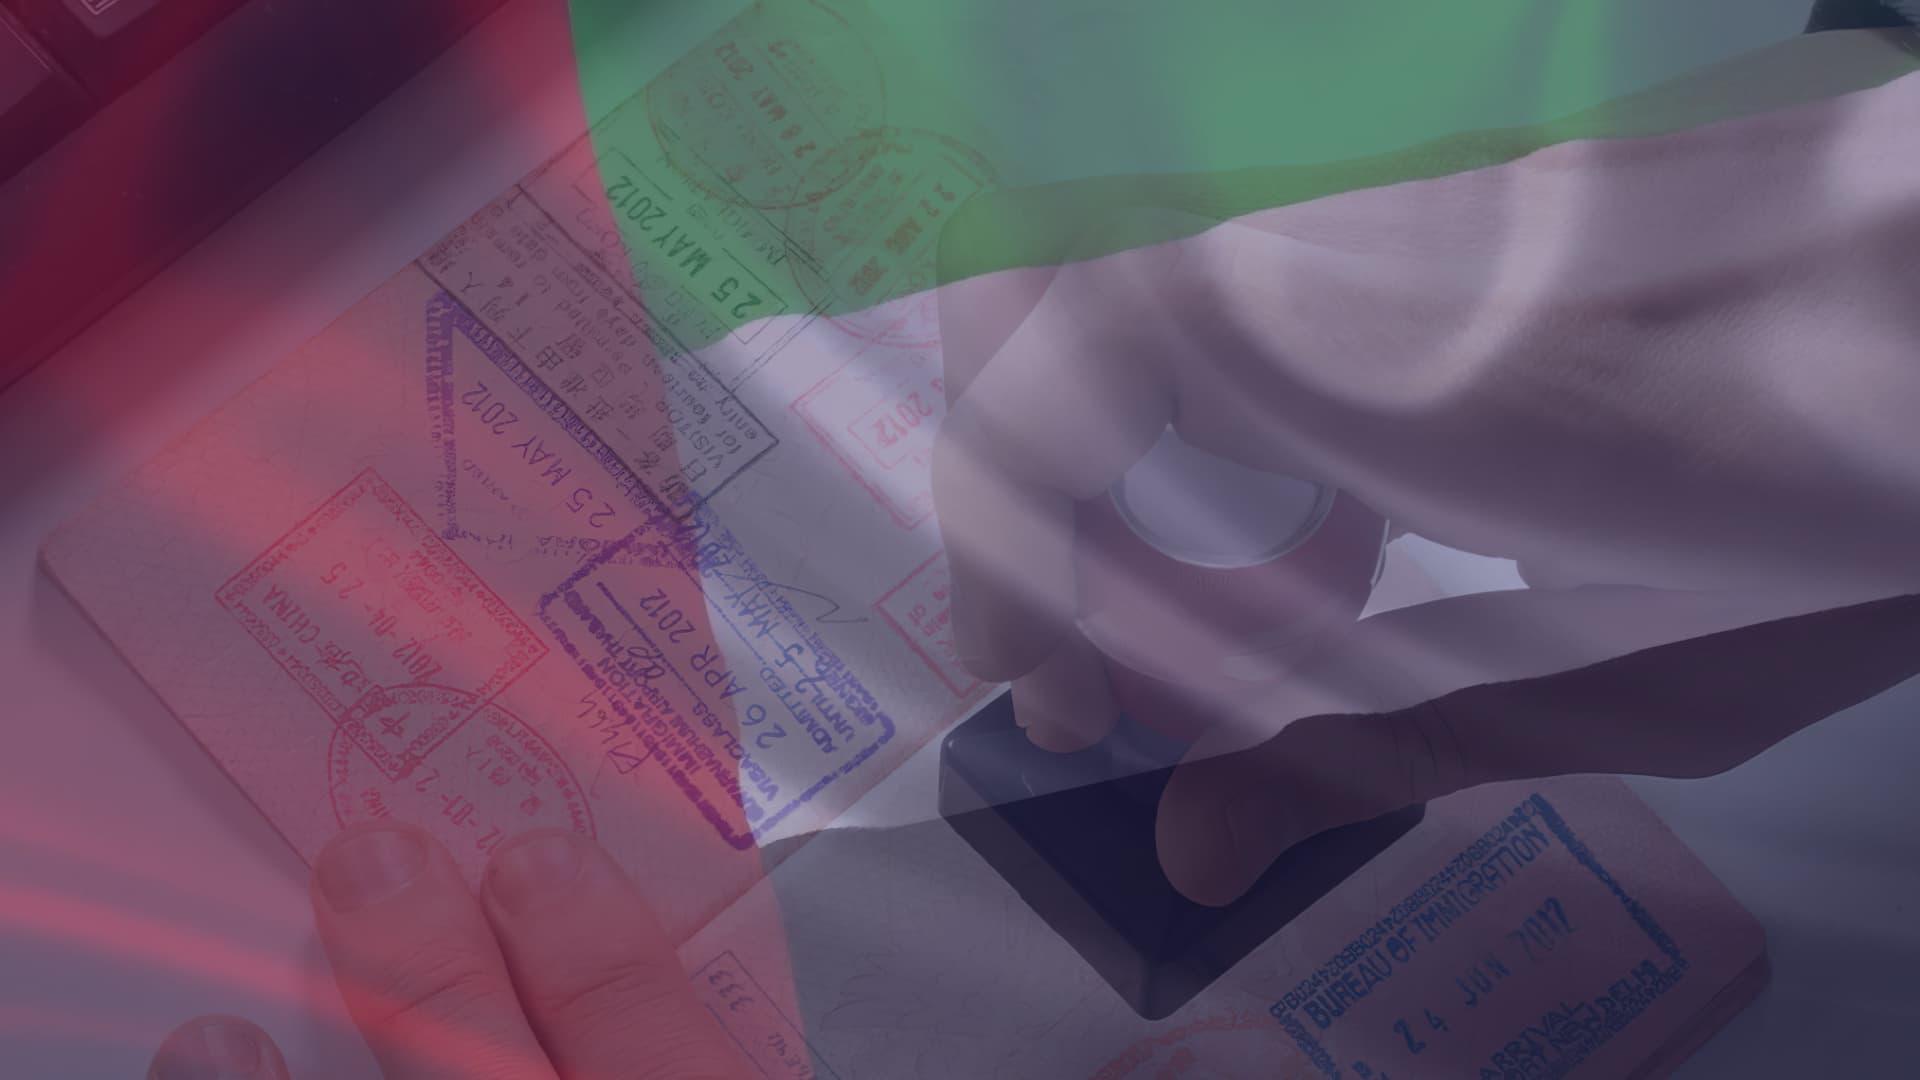 Transparent UAE flag through which you can see a passport being stamped. Residence visas in the UAE